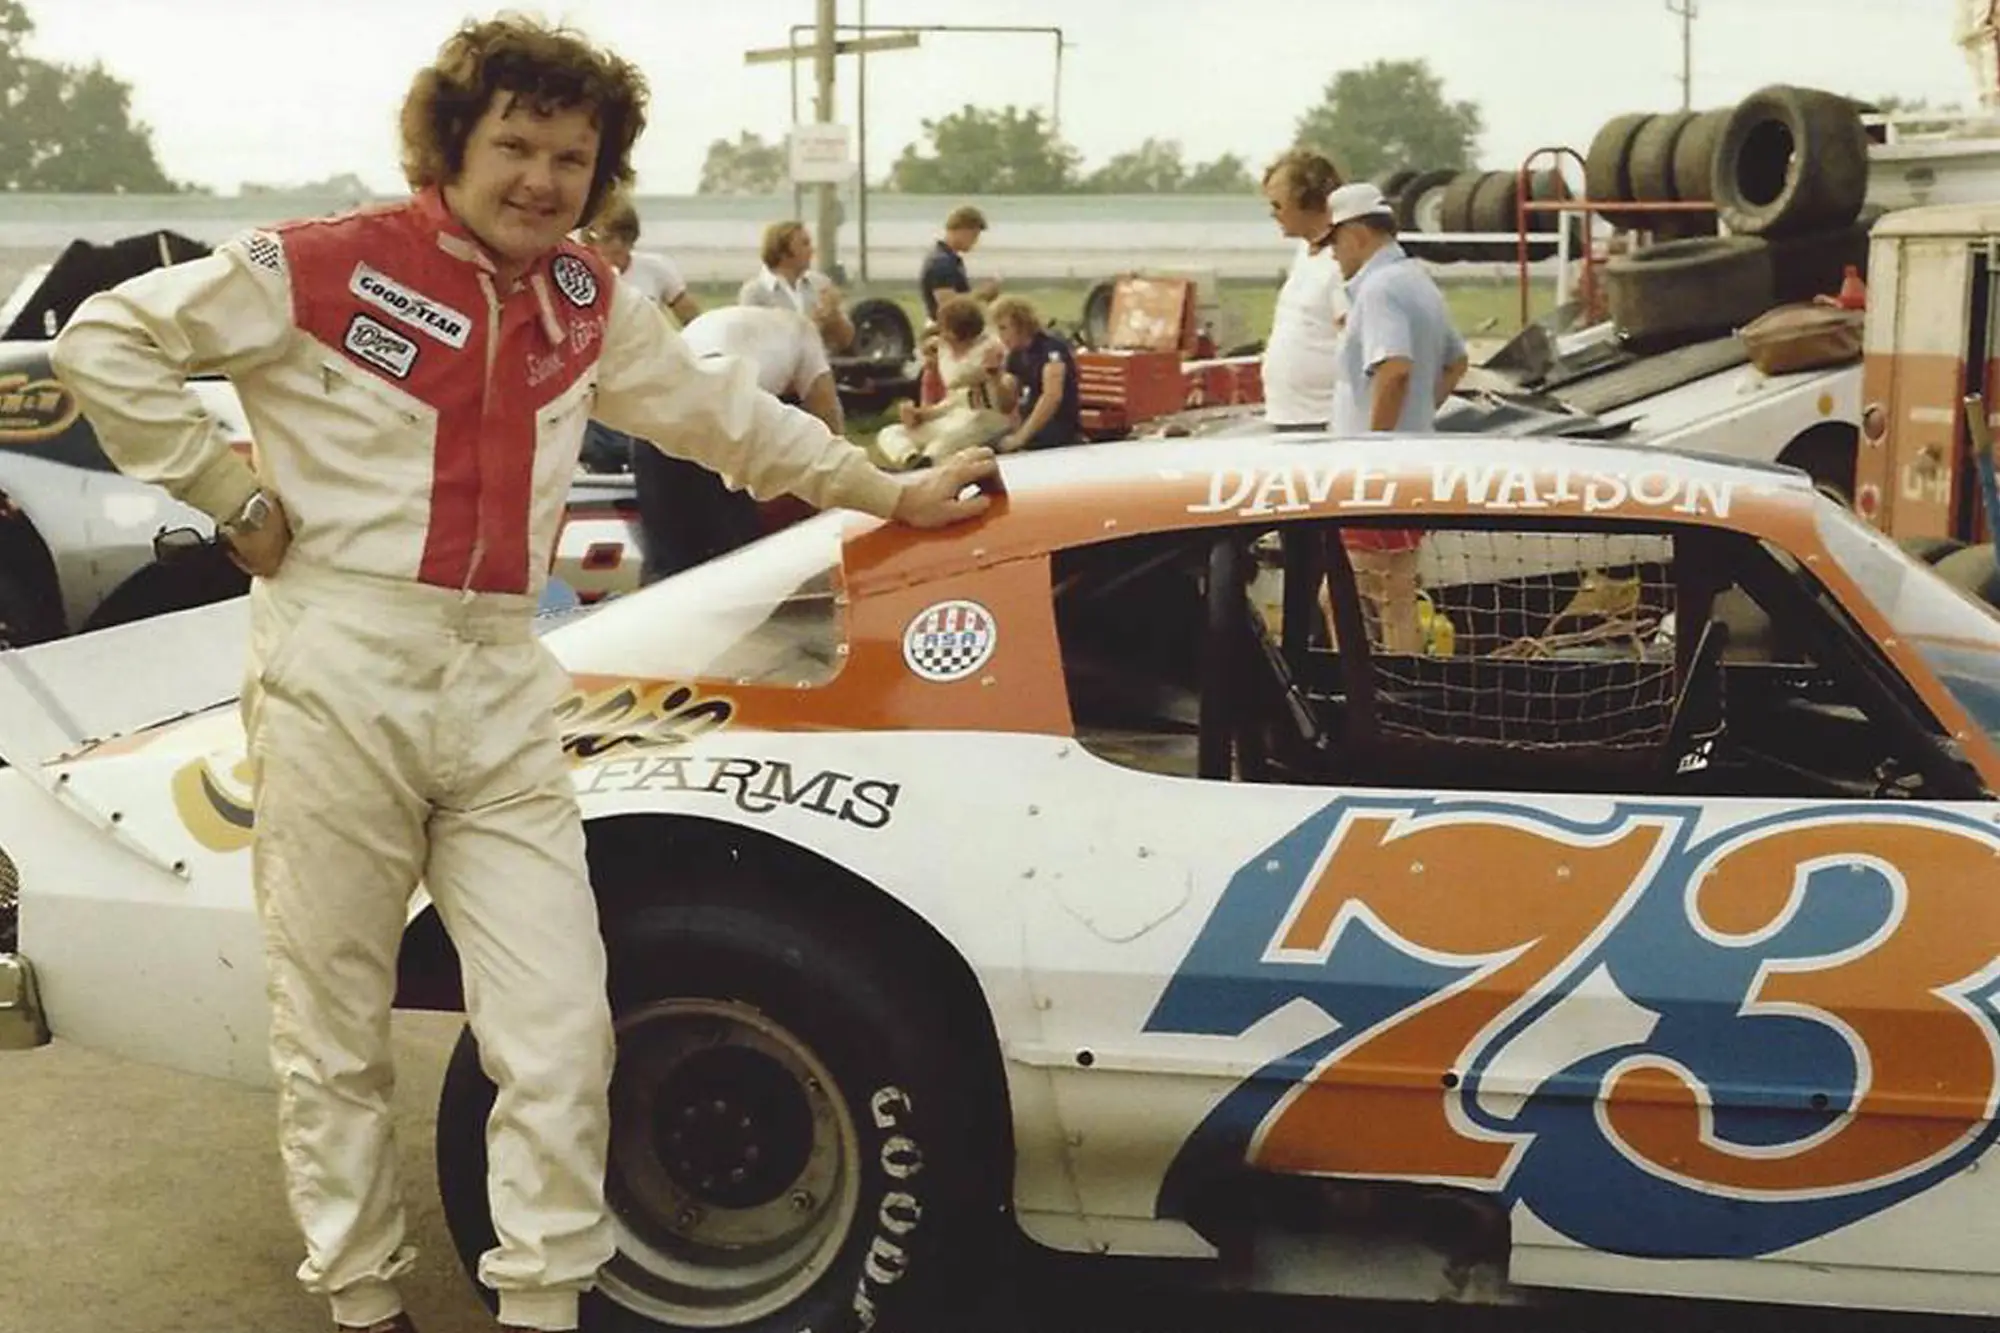 Featured image for “Former ASA Series Champion Dave Watson “Guest of Honor” at Madison”